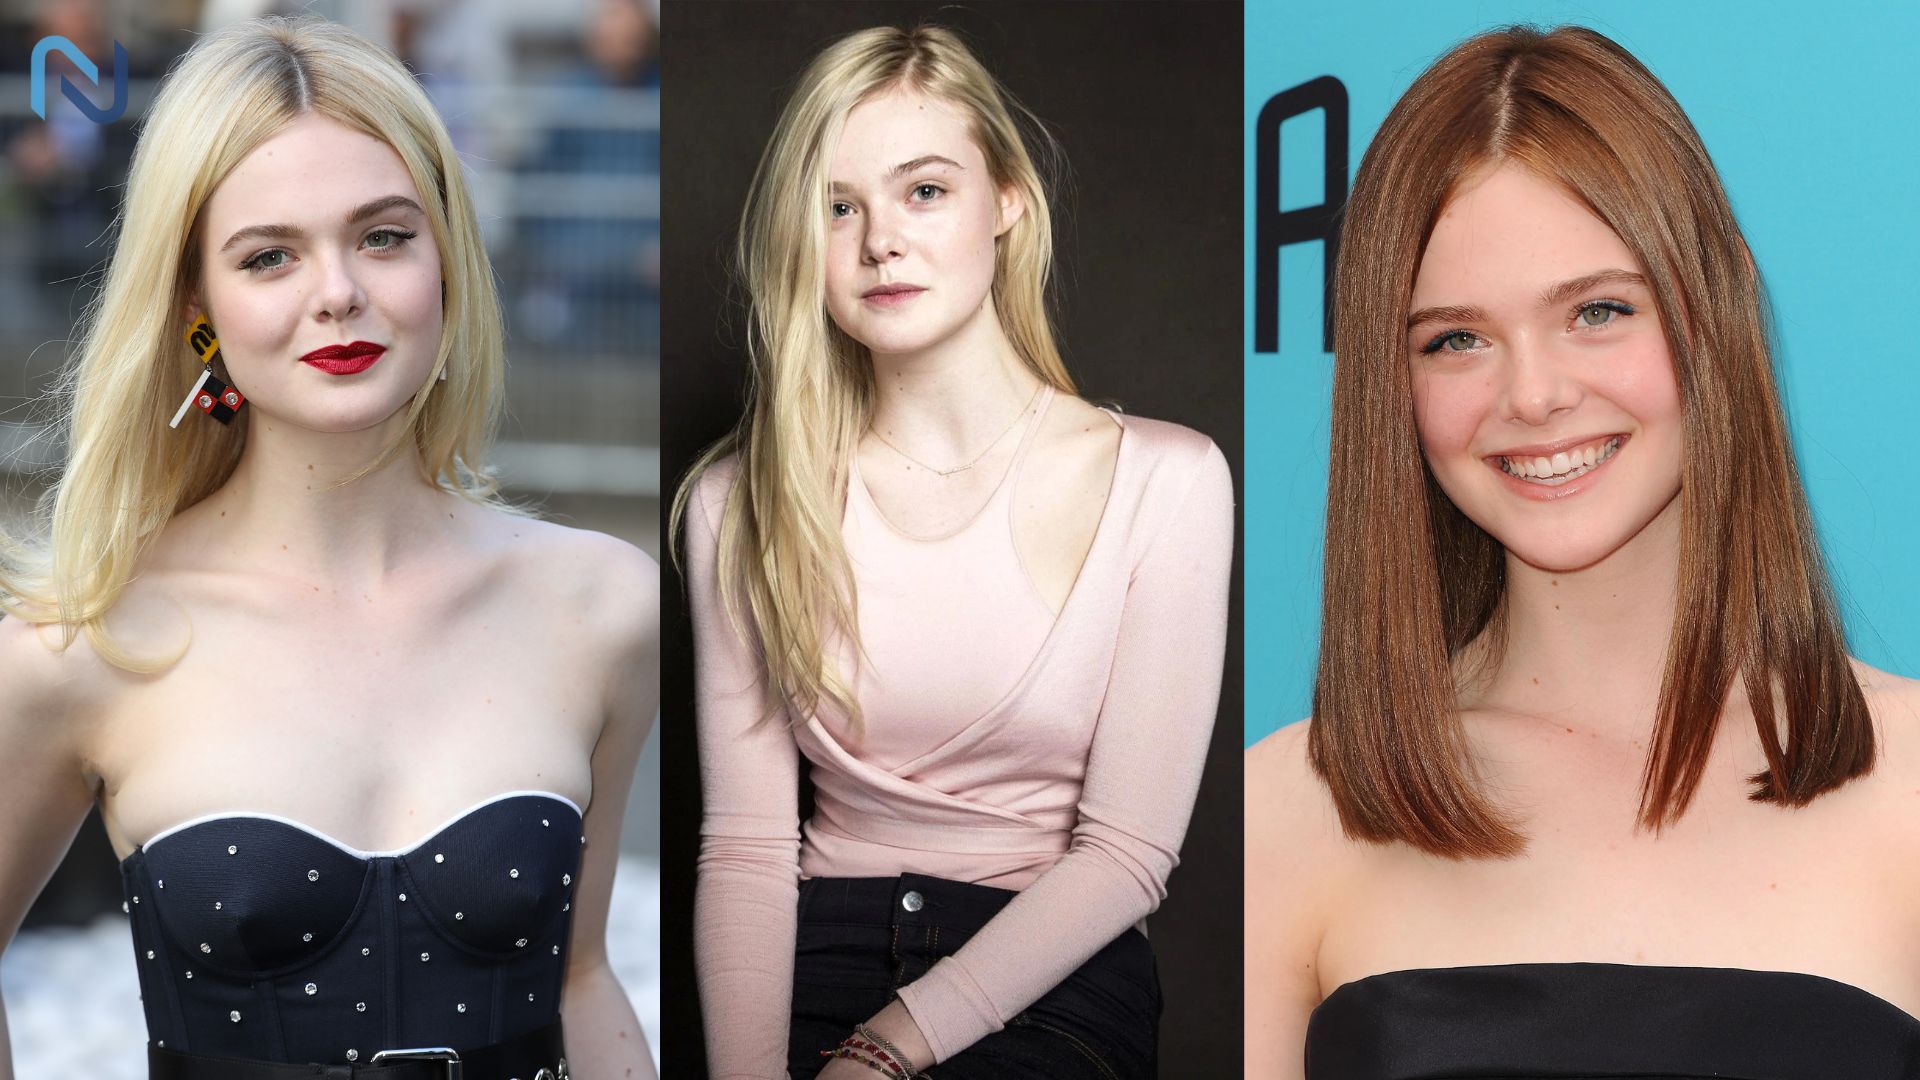 Elle Fanning Hottest and Most Beautiful American Actress